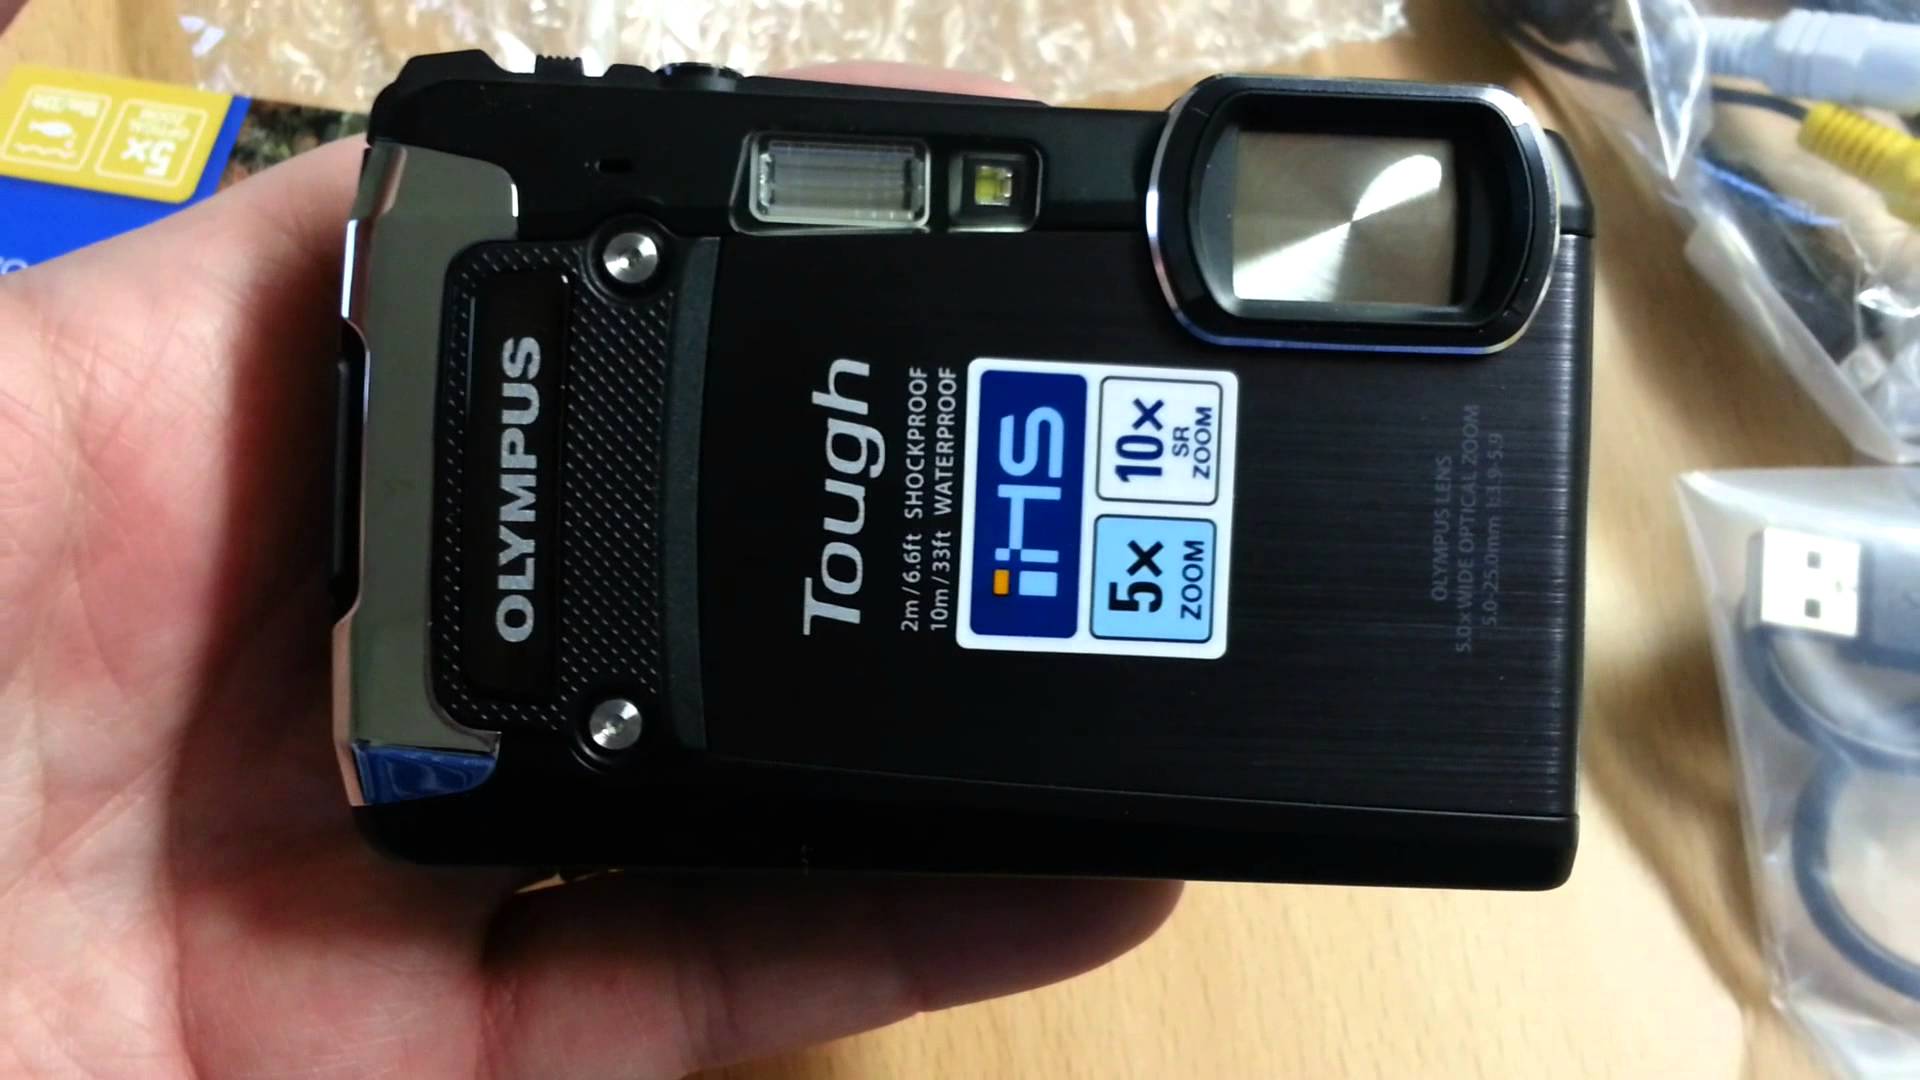 Unboxing of the Olympus Tough TG-820 Compact Camera